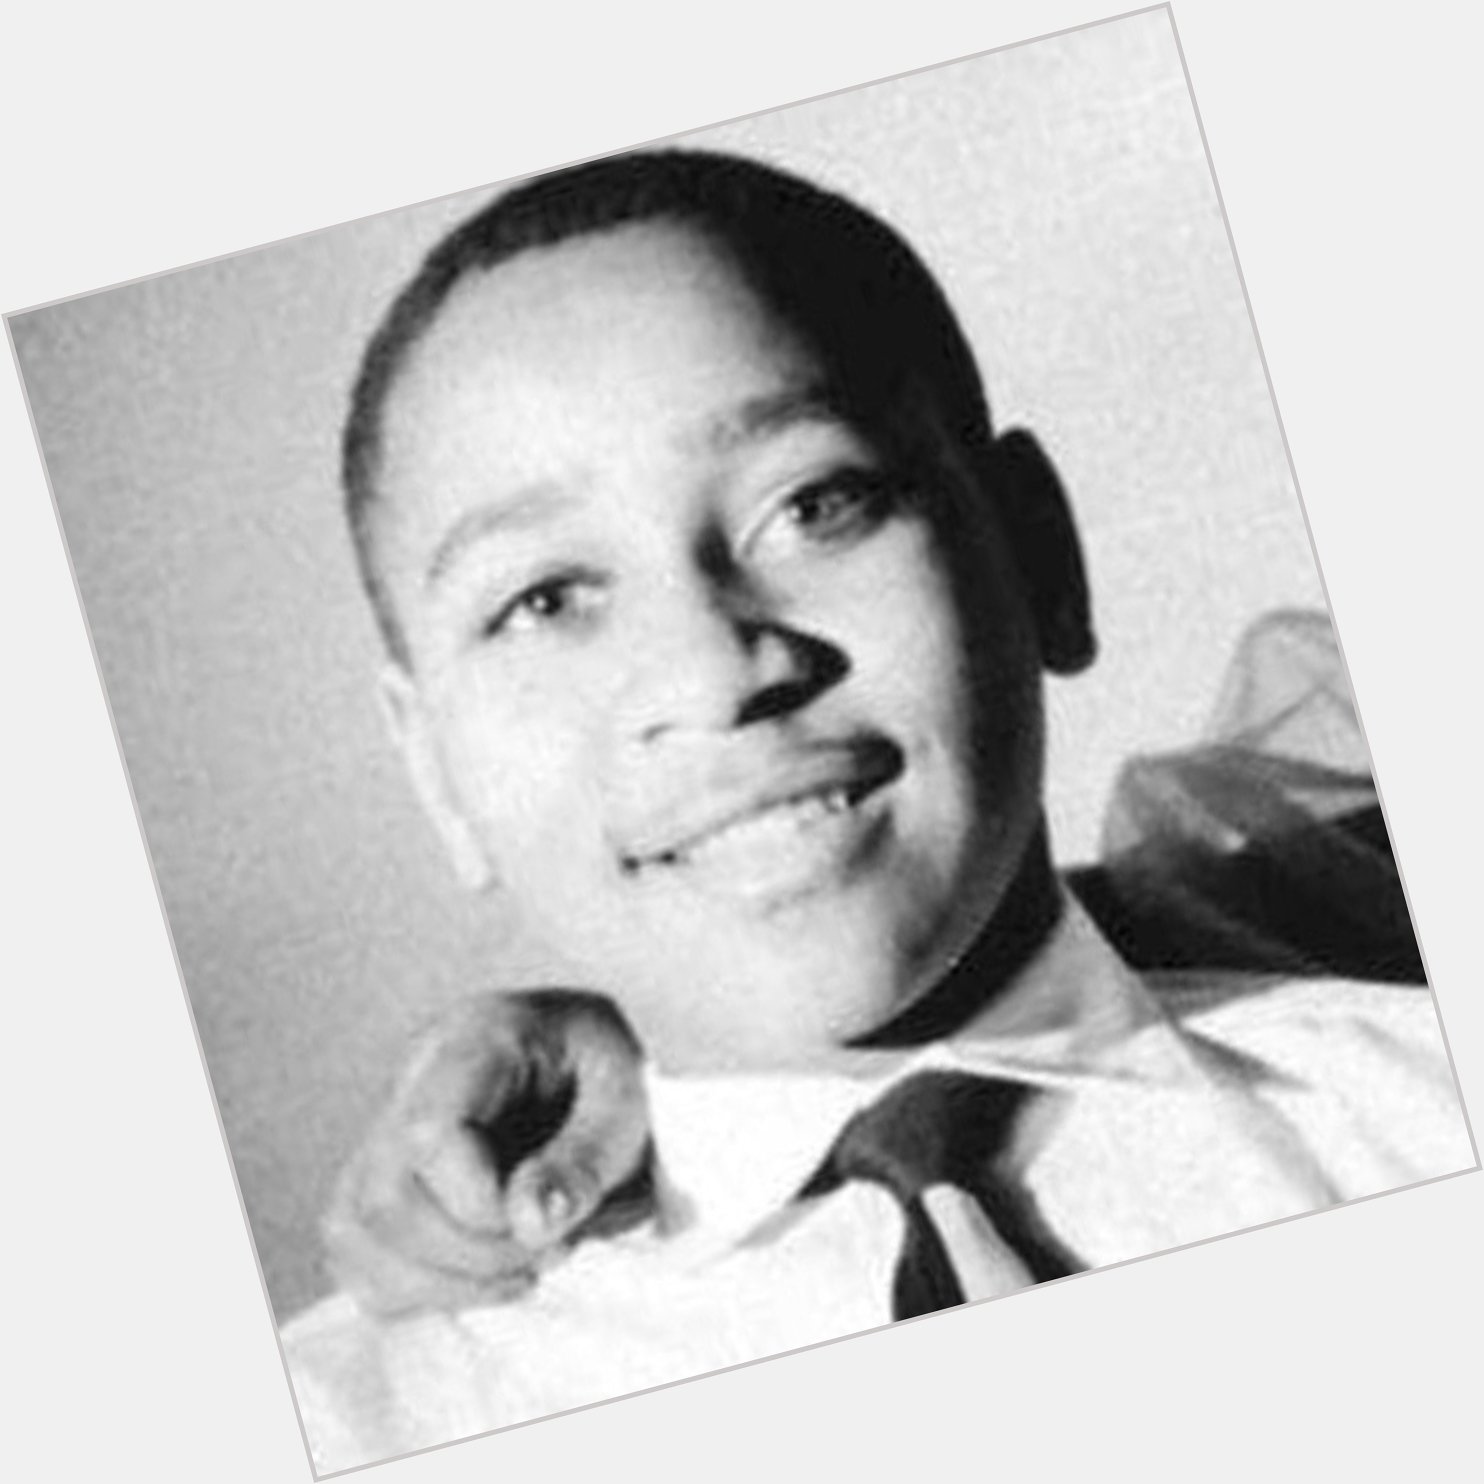 Emmett Till would have been 77 years old today. Happy birthday, Rest In Peace, black lives matter. 